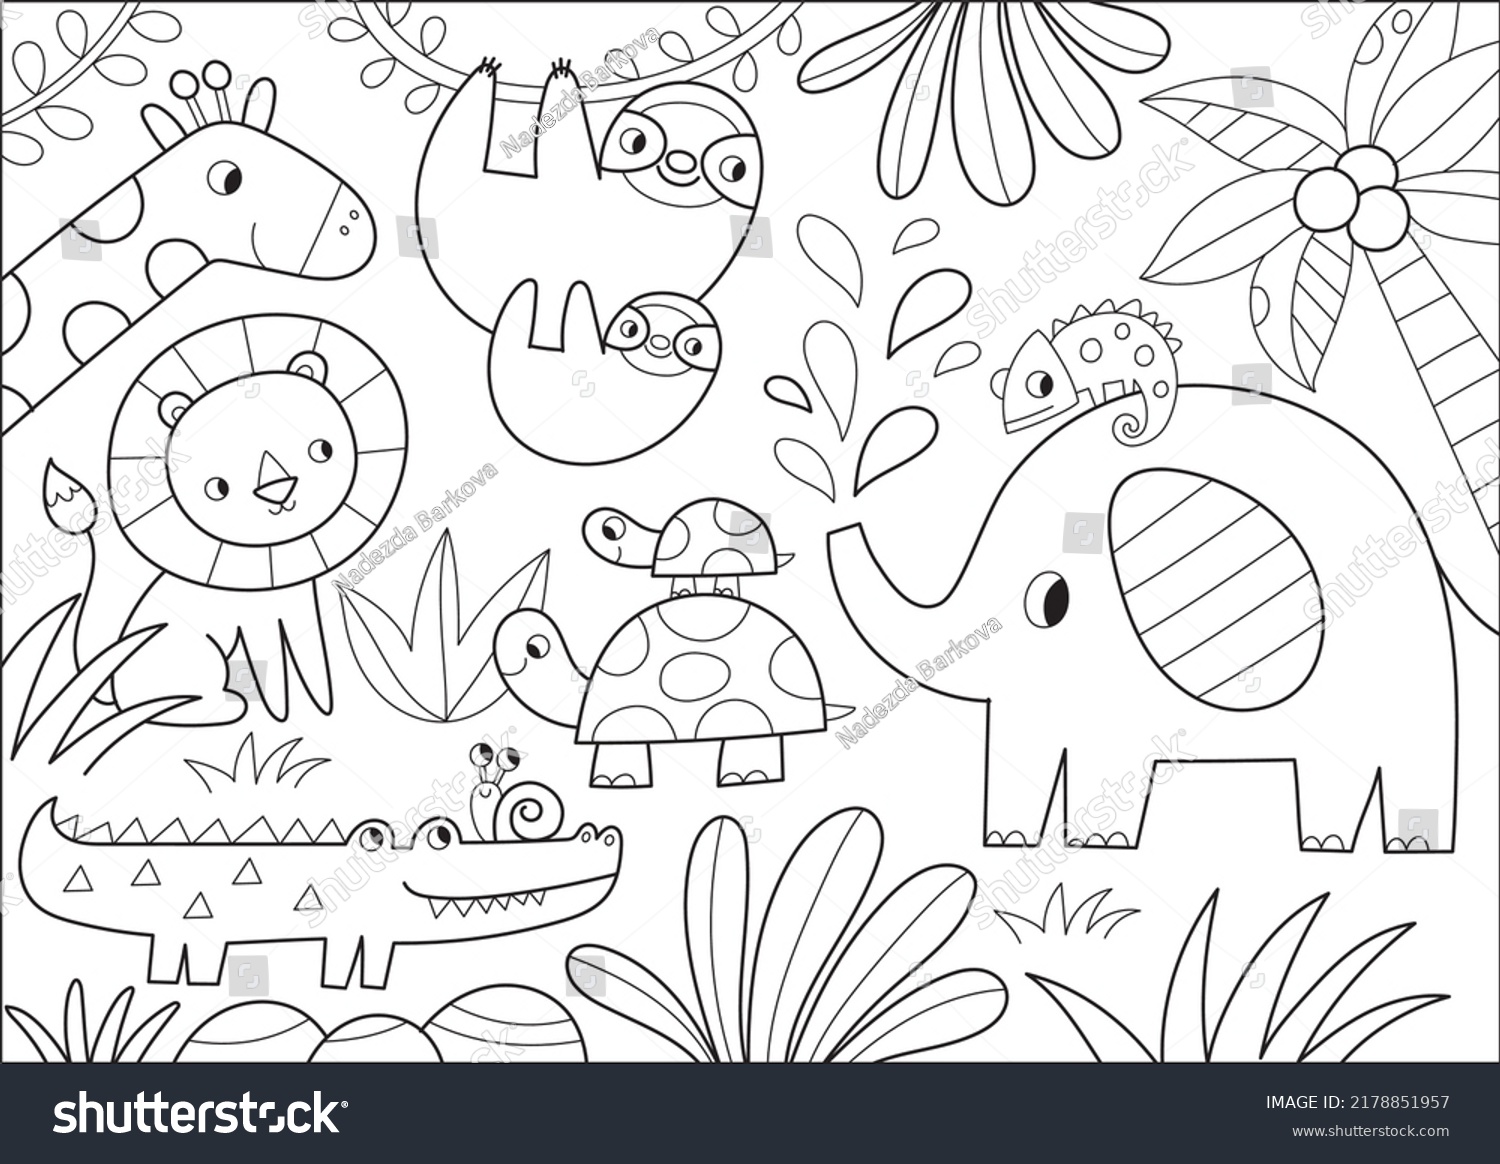 SVG of Cute cartoon hand drawn safari animals. Coloring page - african animals lion, elephant, sloth, turtle, giraffe, crocodile, chameleon. Activity coloring poster for children svg